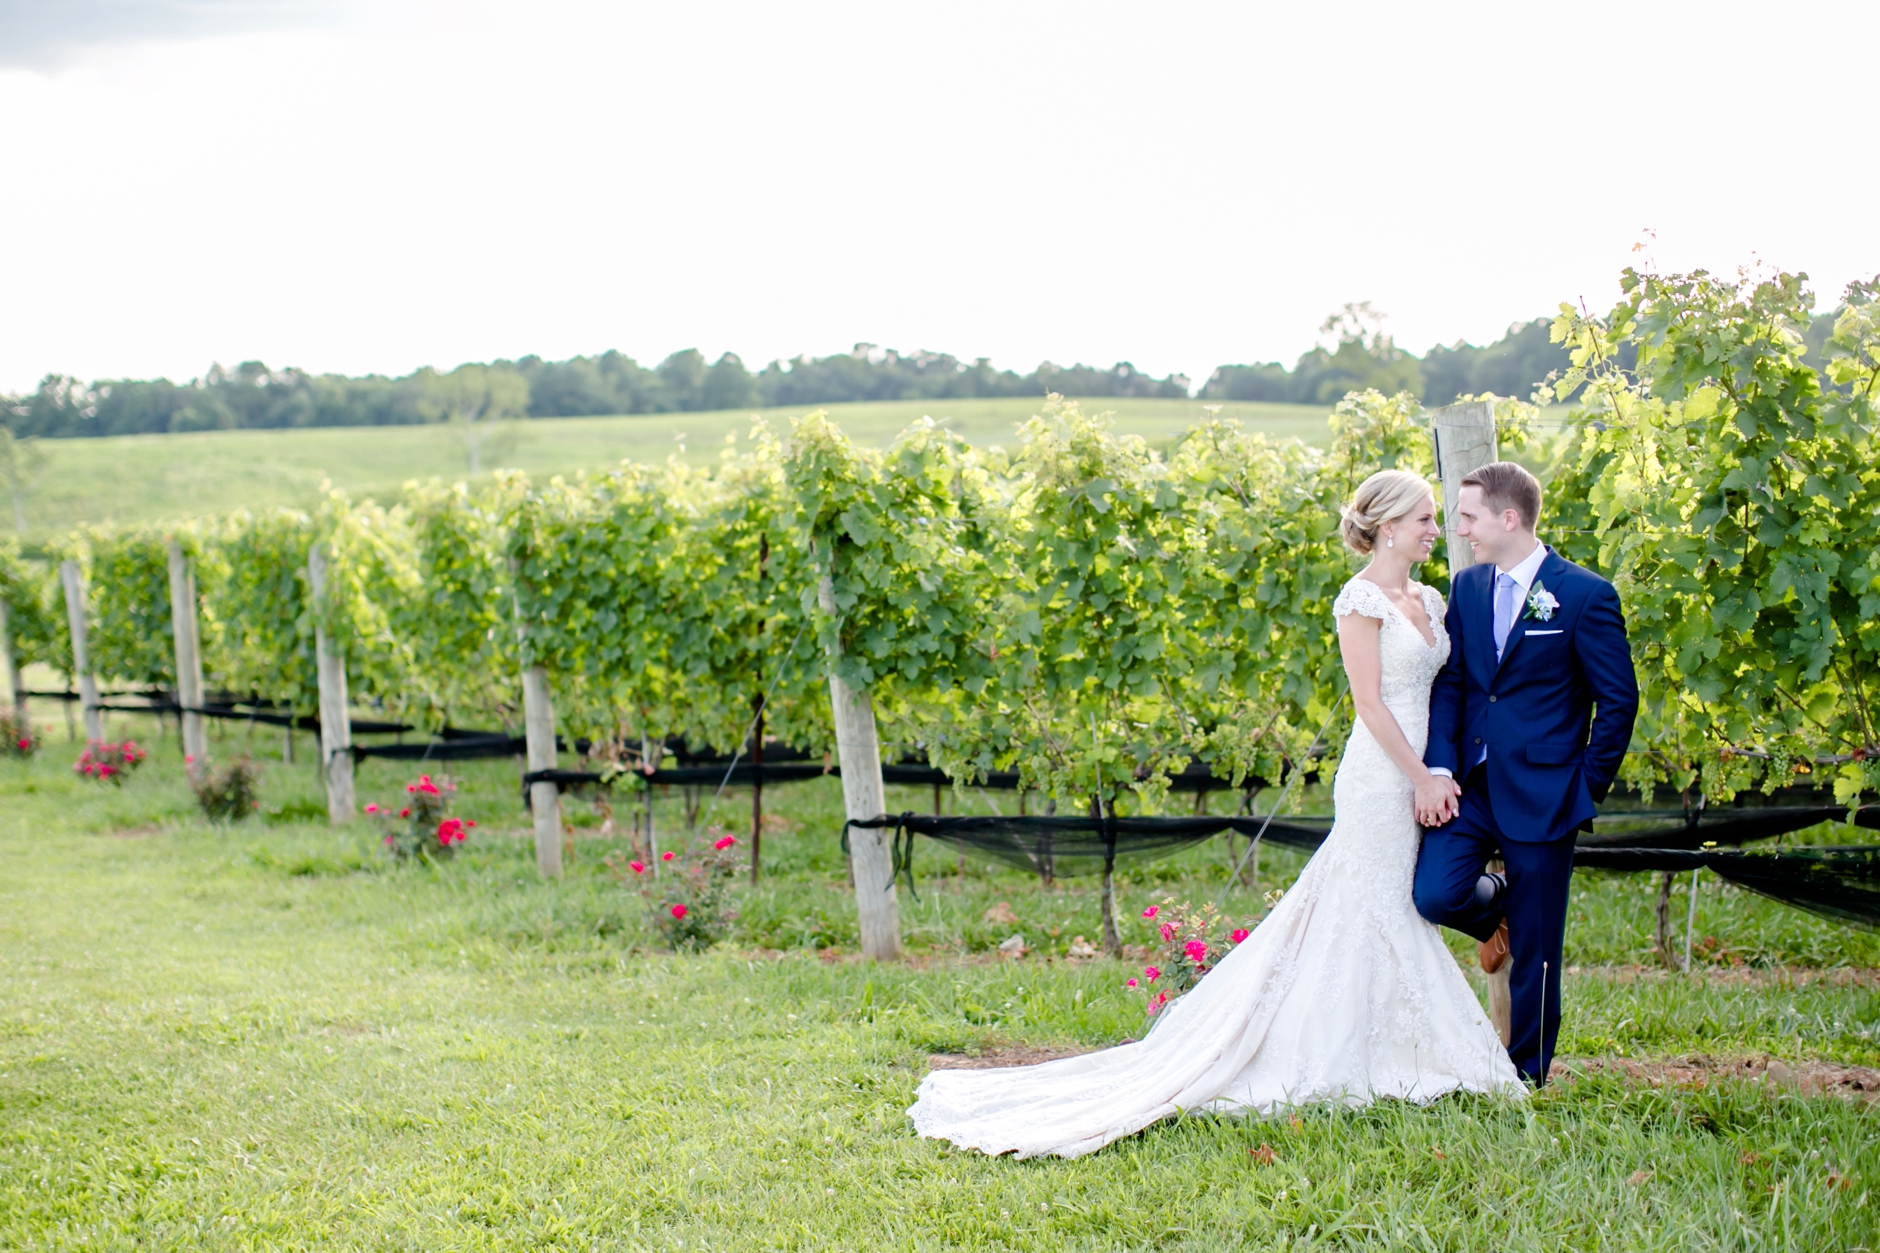 45A-Stone-Tower-Winery-Summer-Wedding-GG-1155